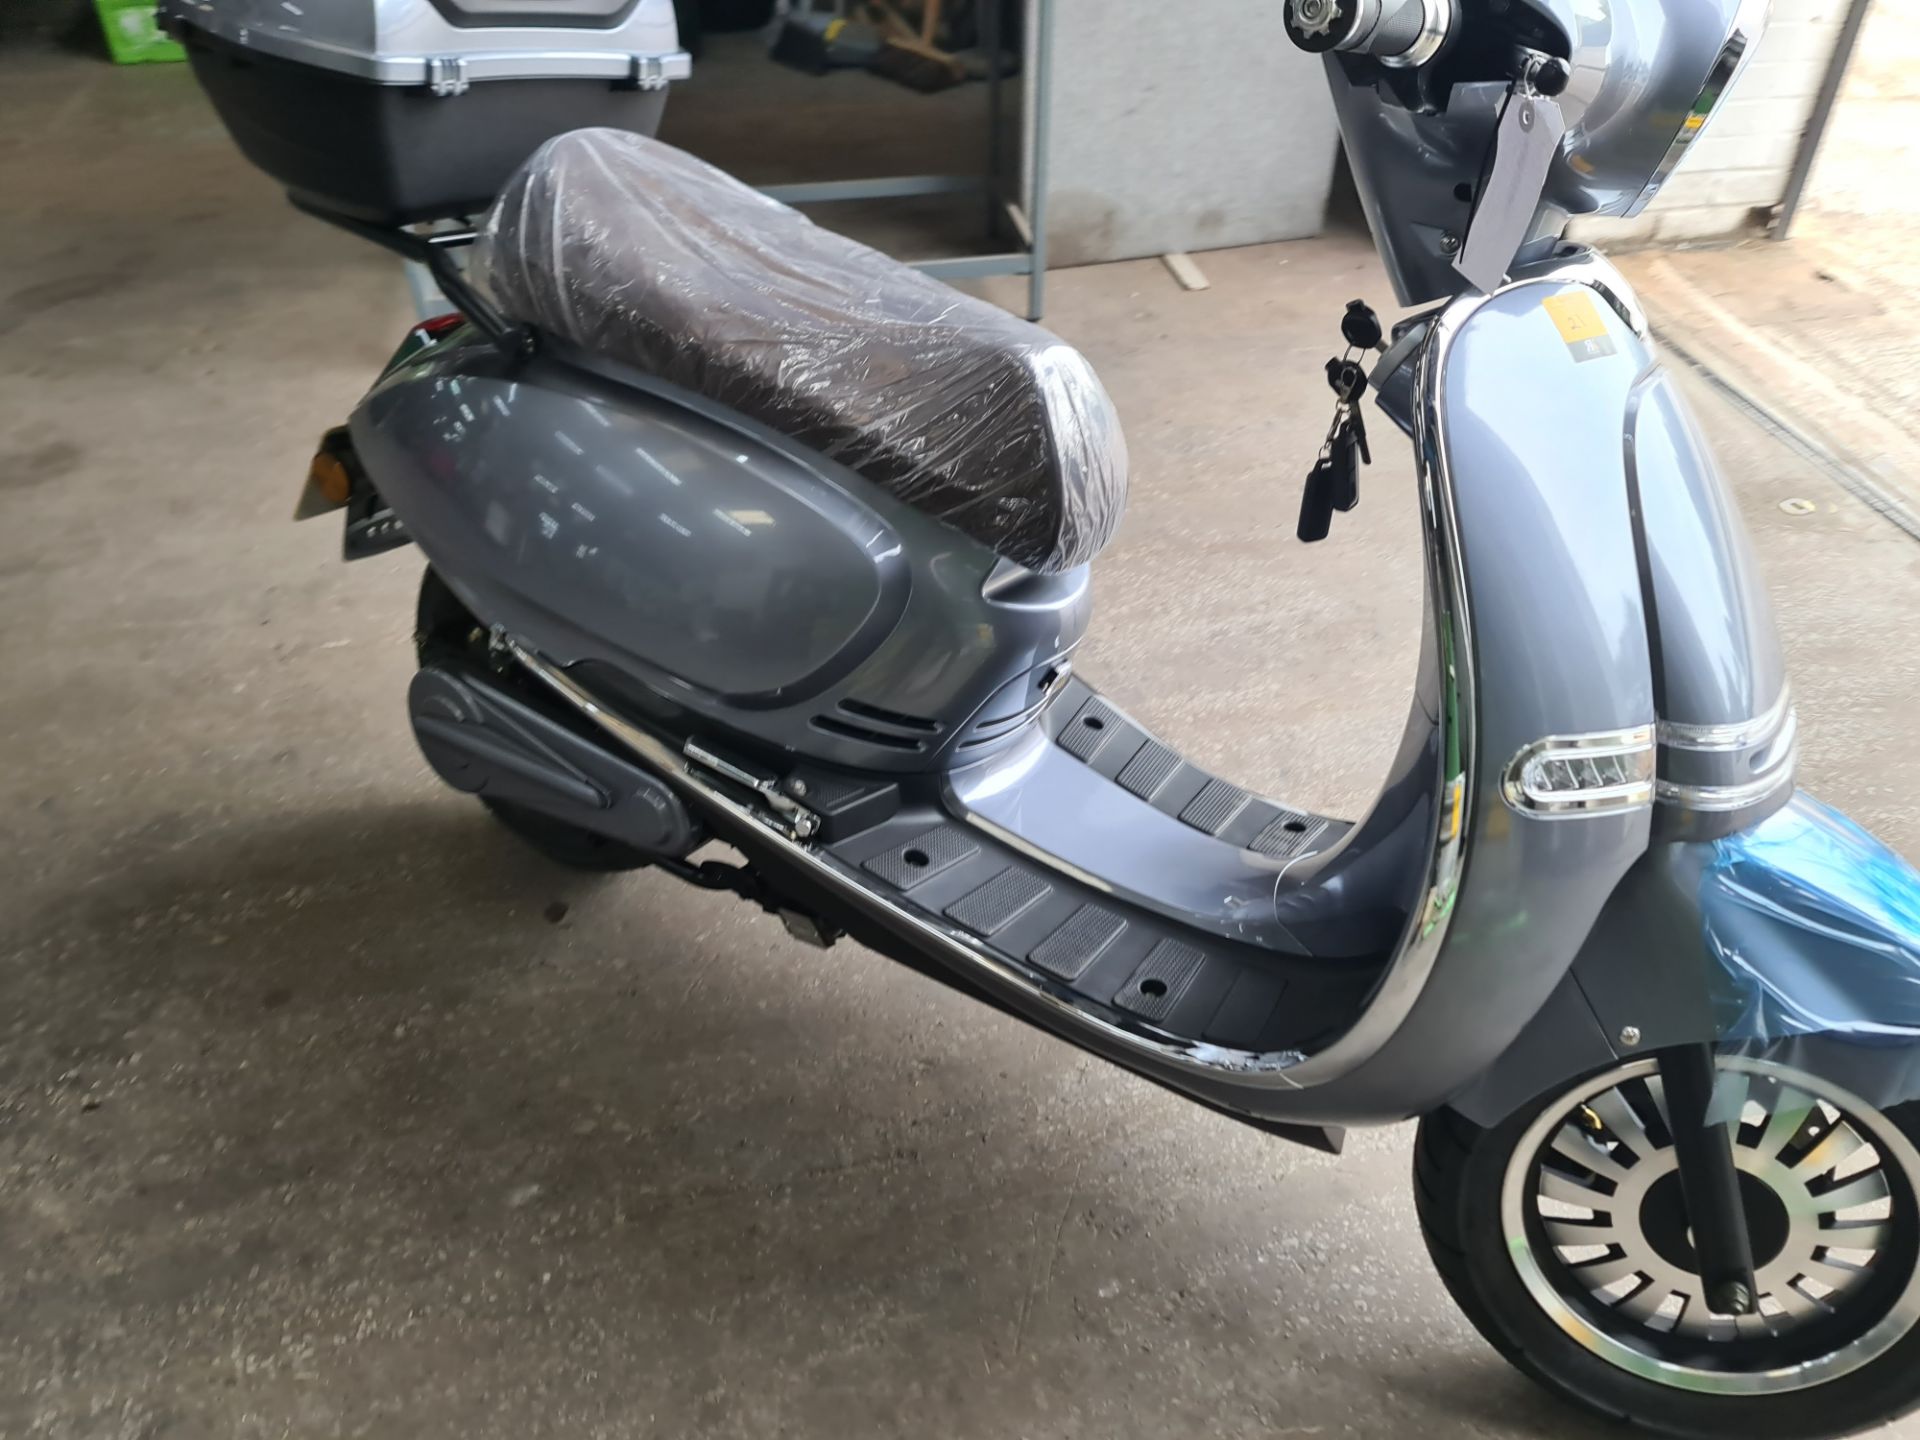 LR23 GVZ Ultra 4000 electric scooter, colour: grey, 125cc equivalent, 50mph top speed, 50 mile range - Image 7 of 28